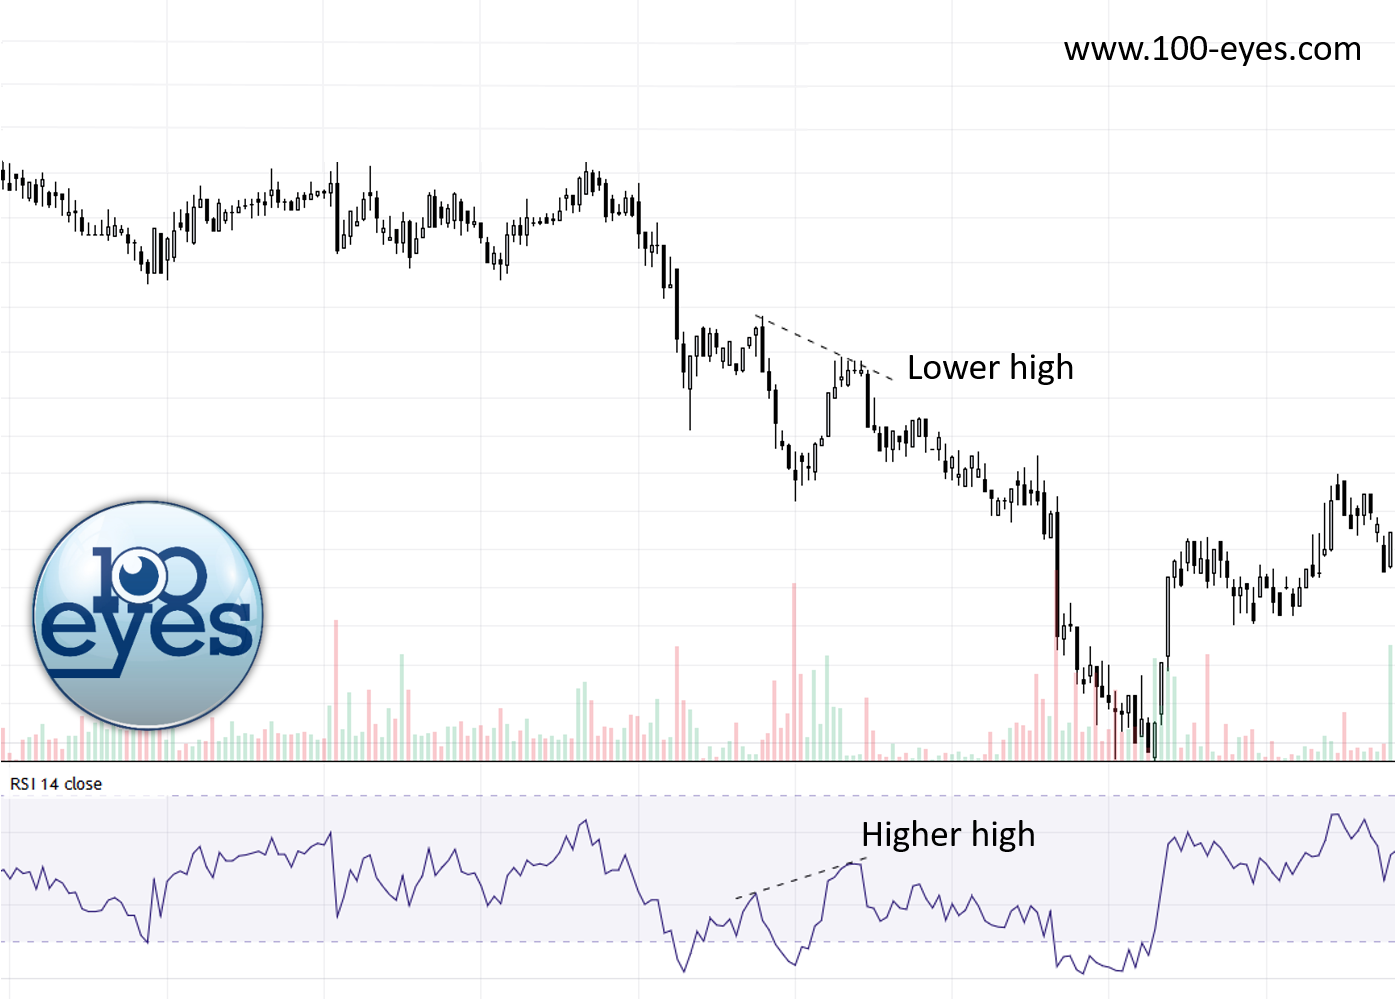 You can see an example here of a valid hidden bearish divergence